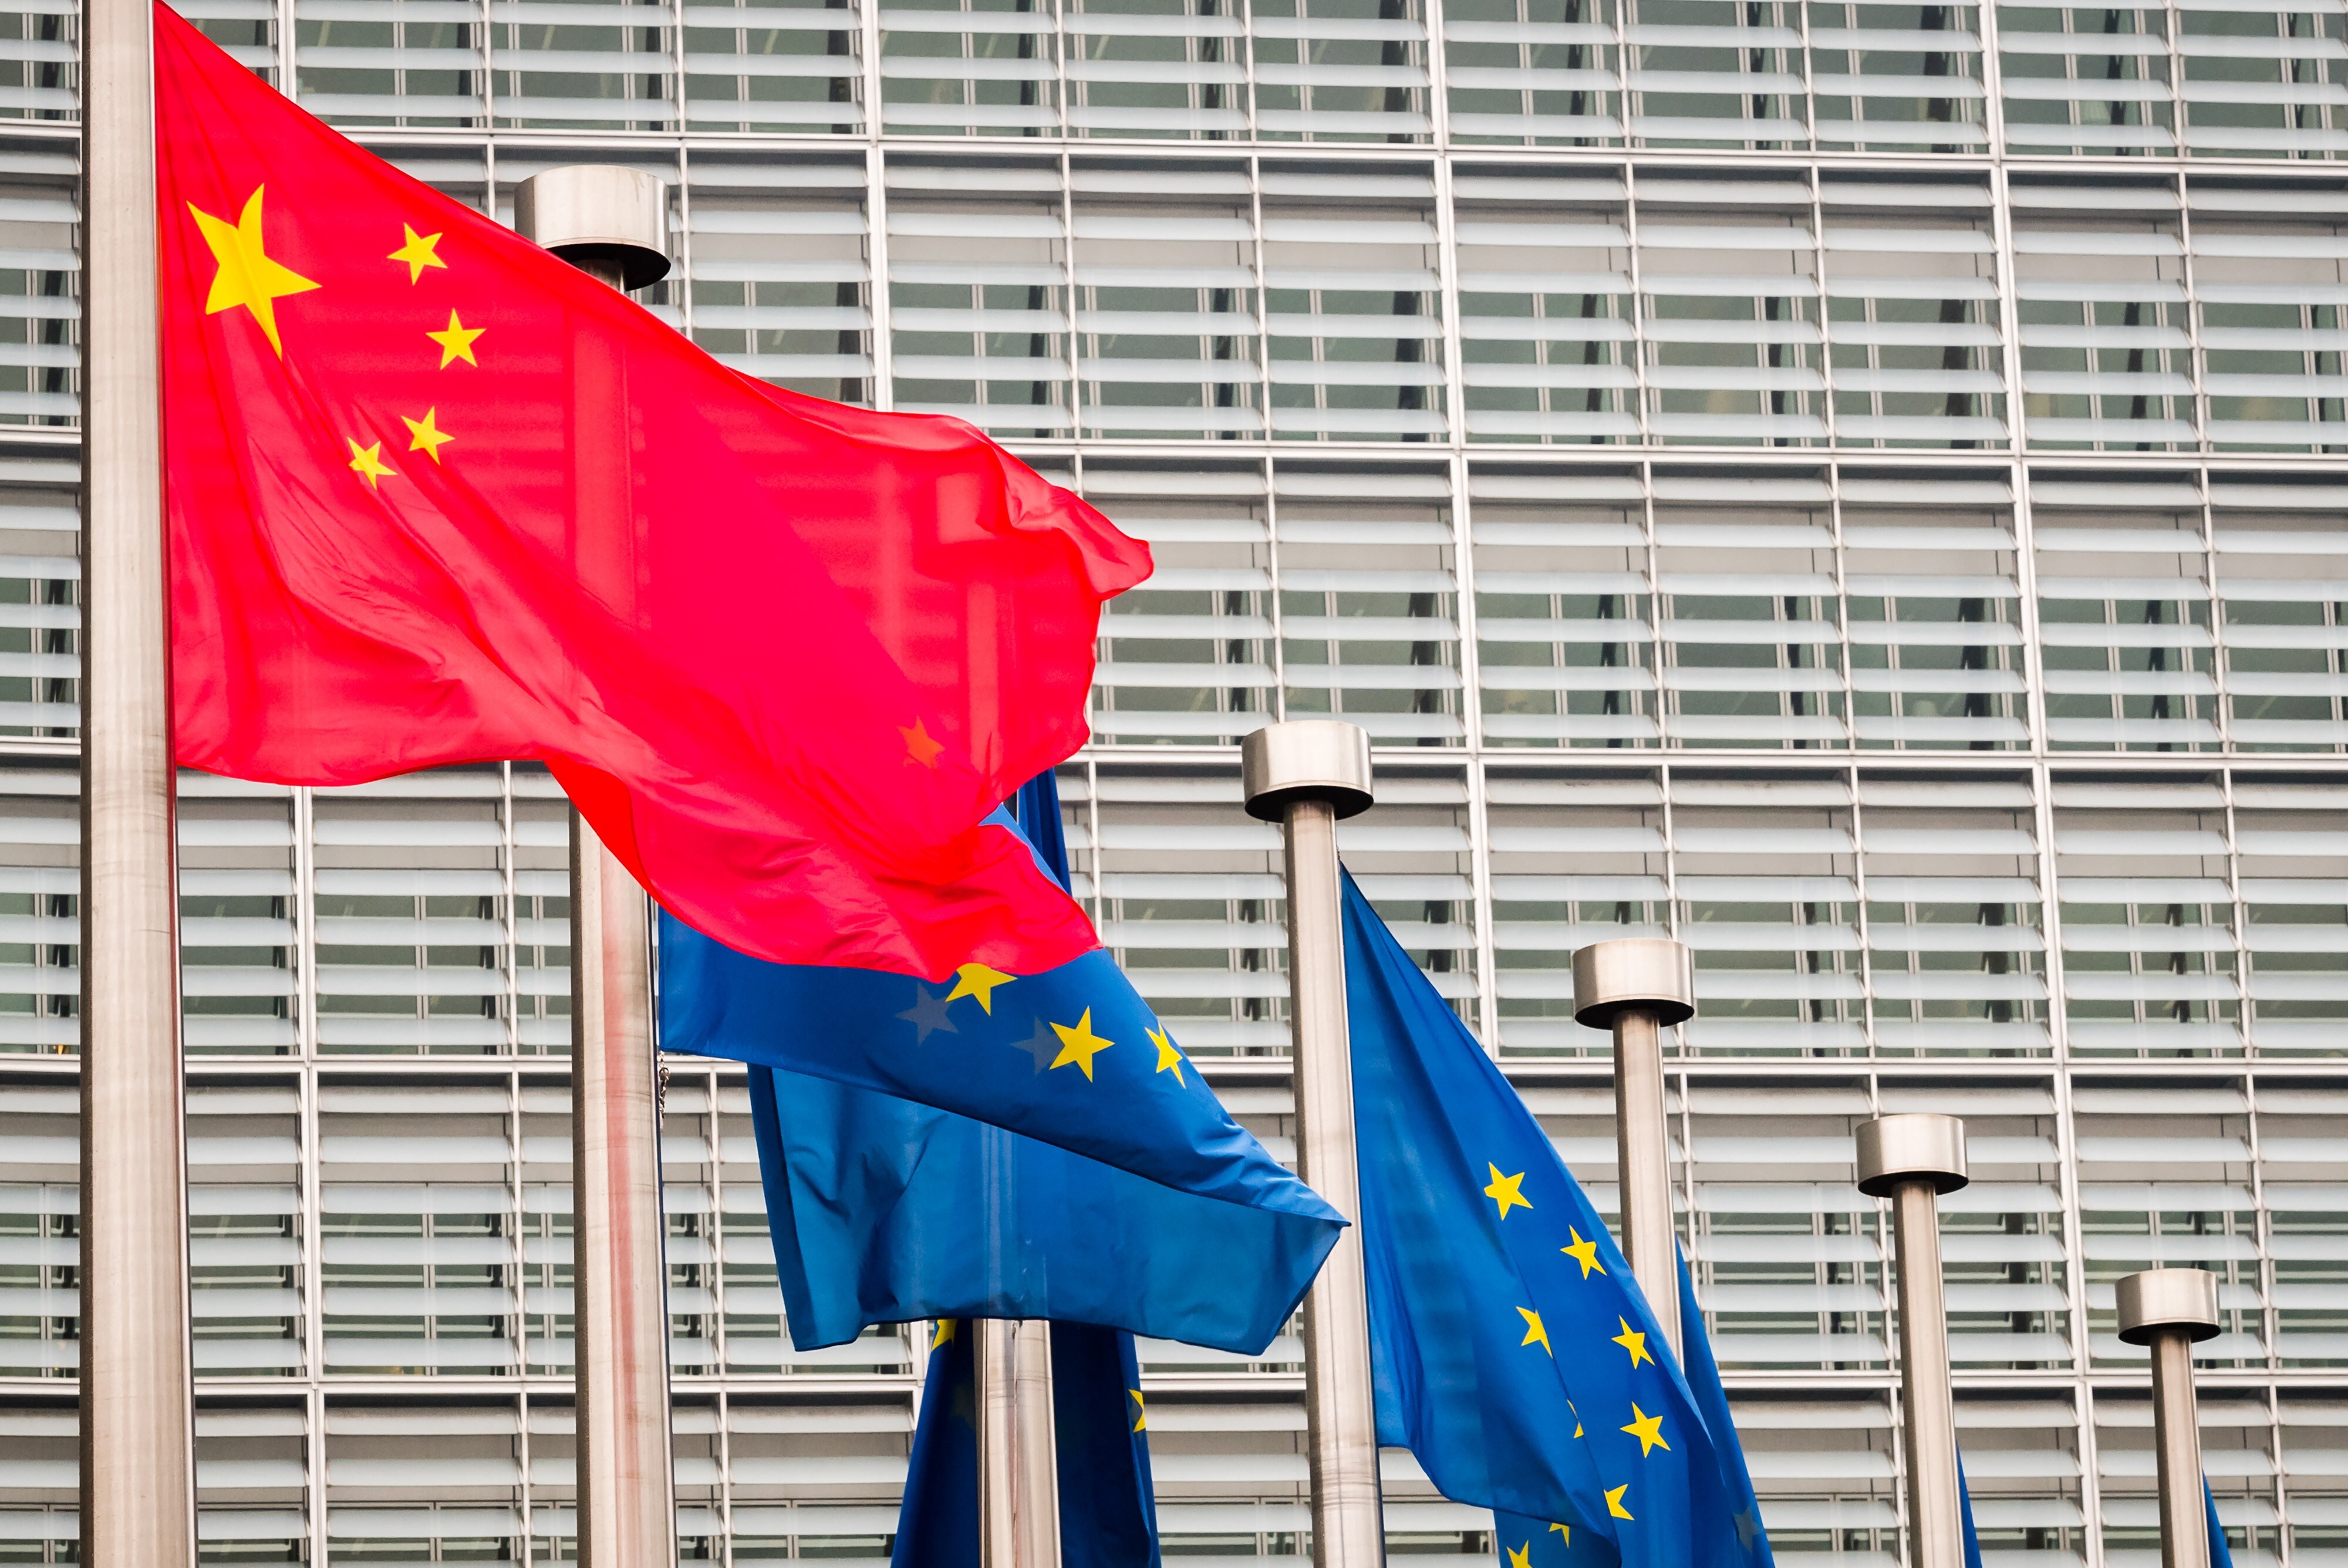 The flags of China and the European Union in Brussels, Belgium. Photo: Bloomberg